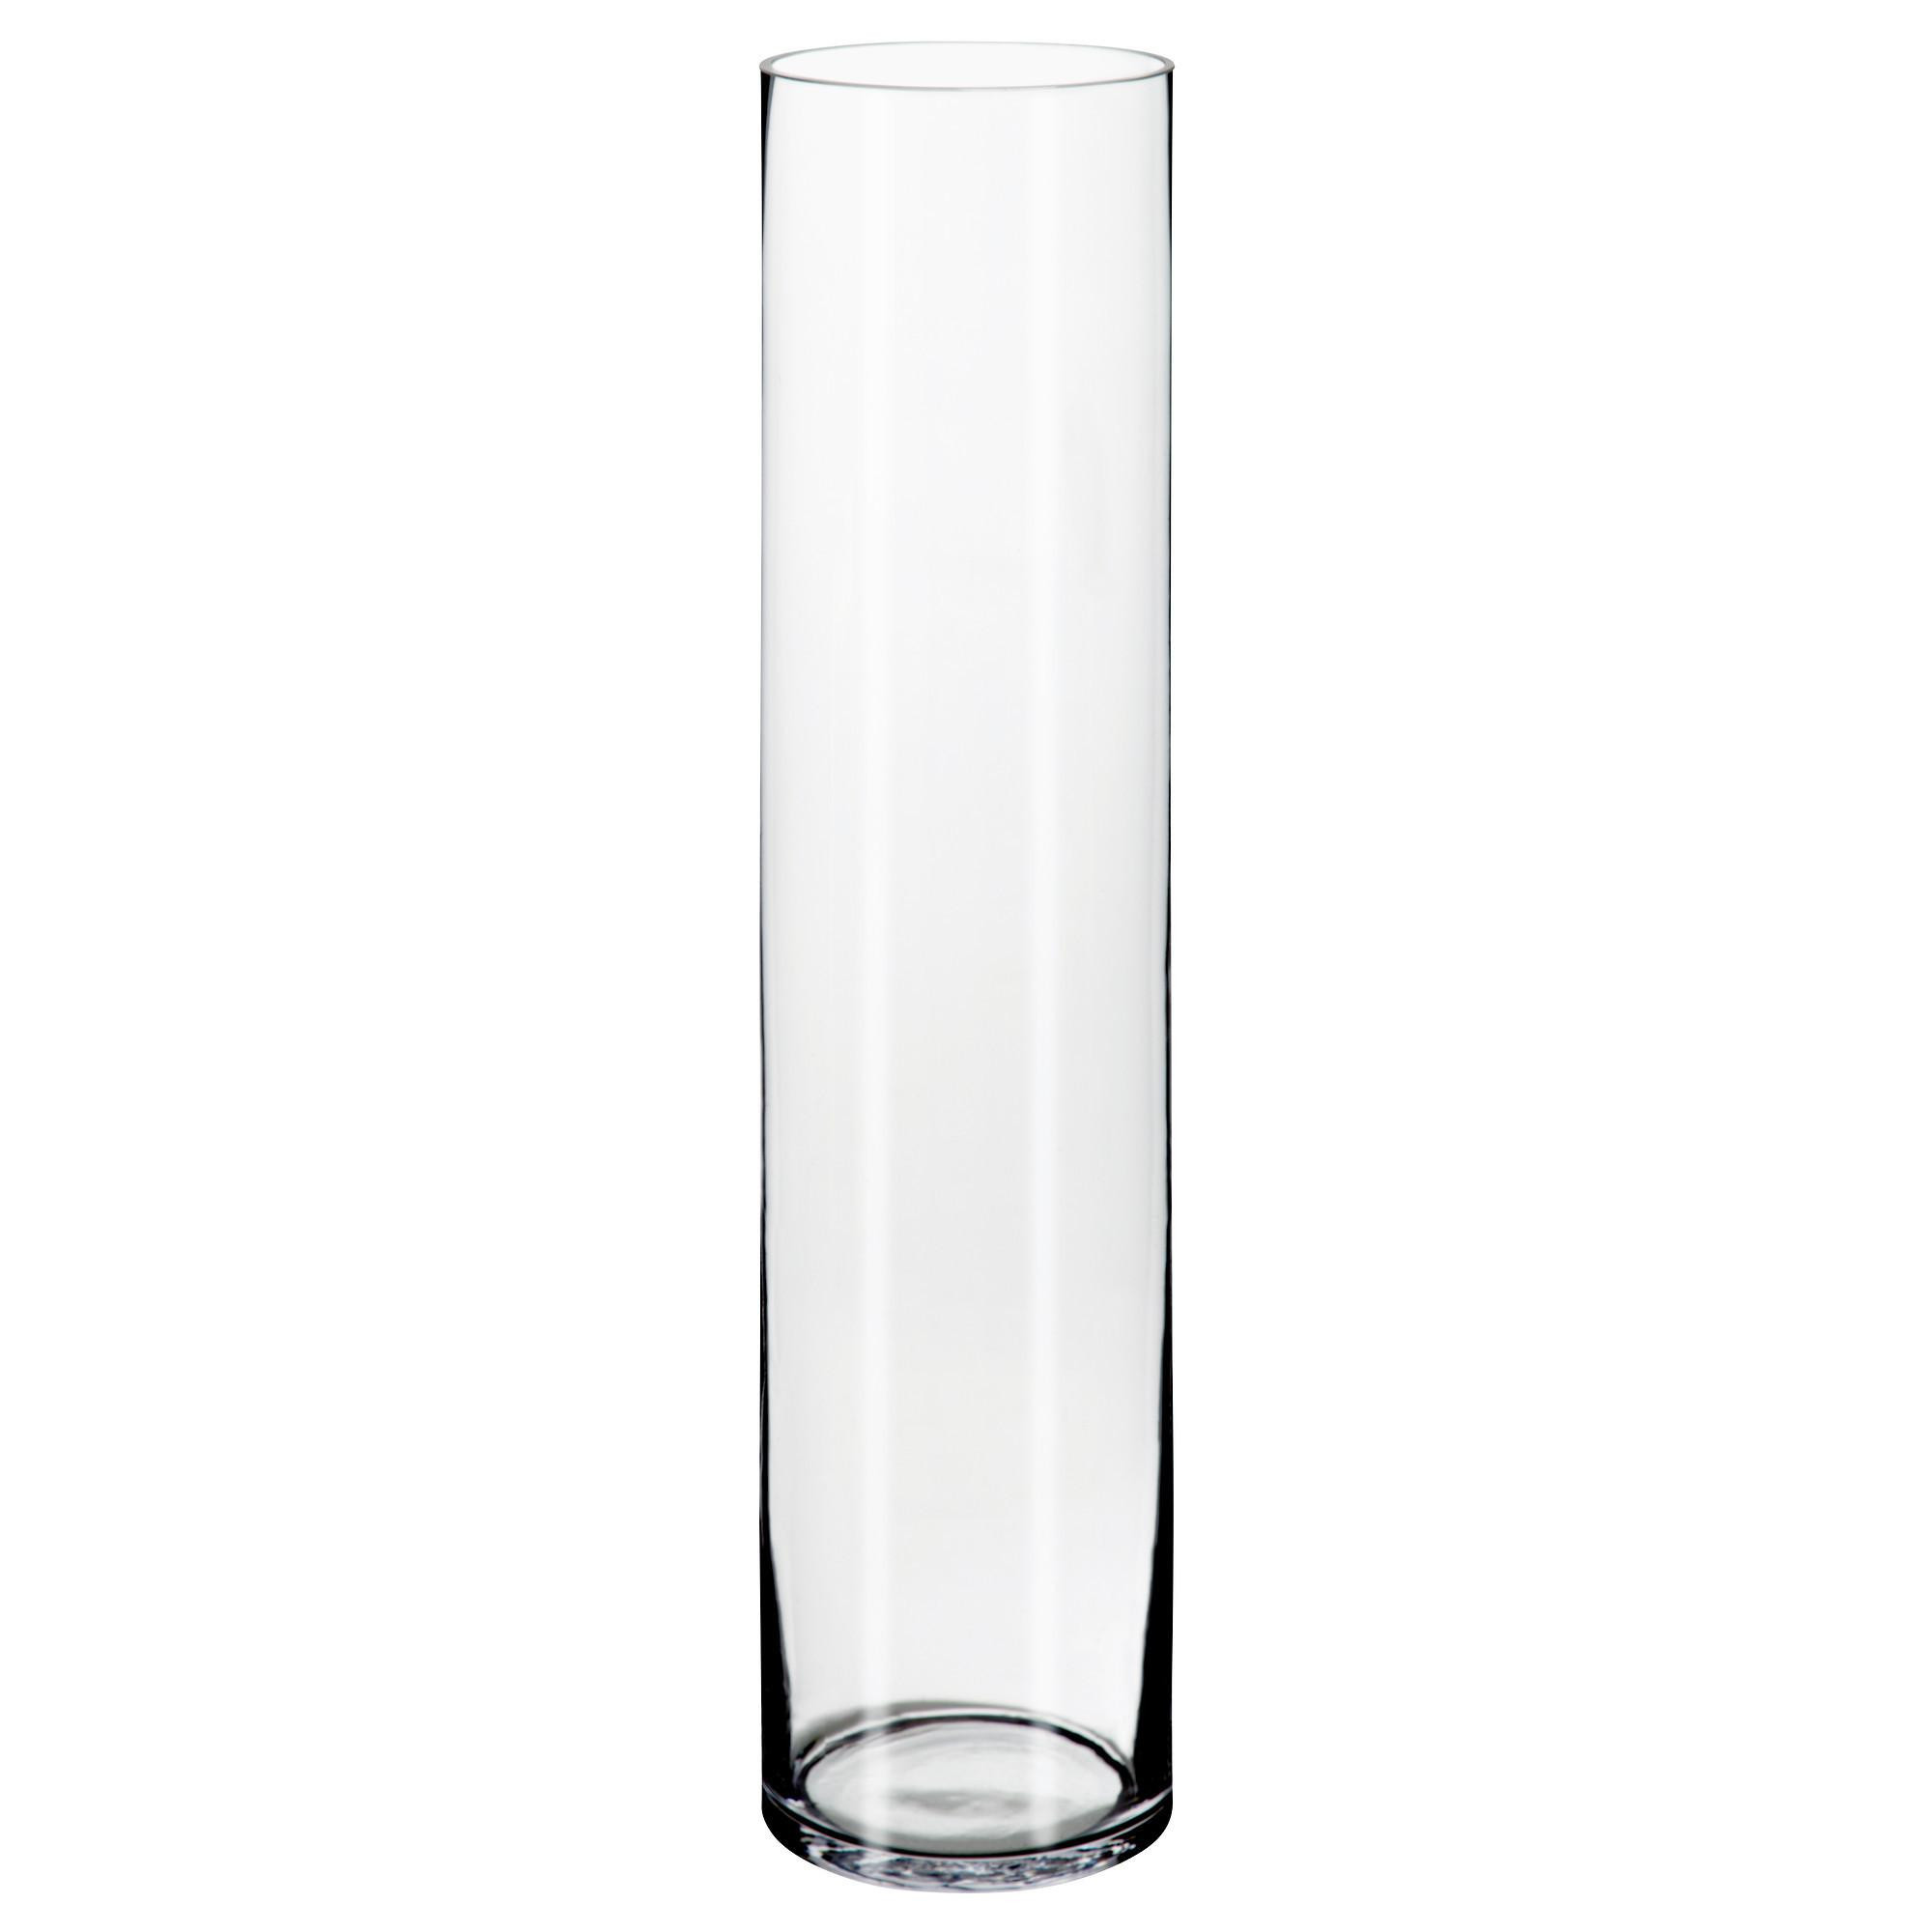 13 attractive White Floor Vase with Flowers 2023 free download white floor vase with flowers of living room addition best of living room vase glass fresh pe s5h with living room addition best of living room vase glass fresh pe s5h vases ikea floor vase